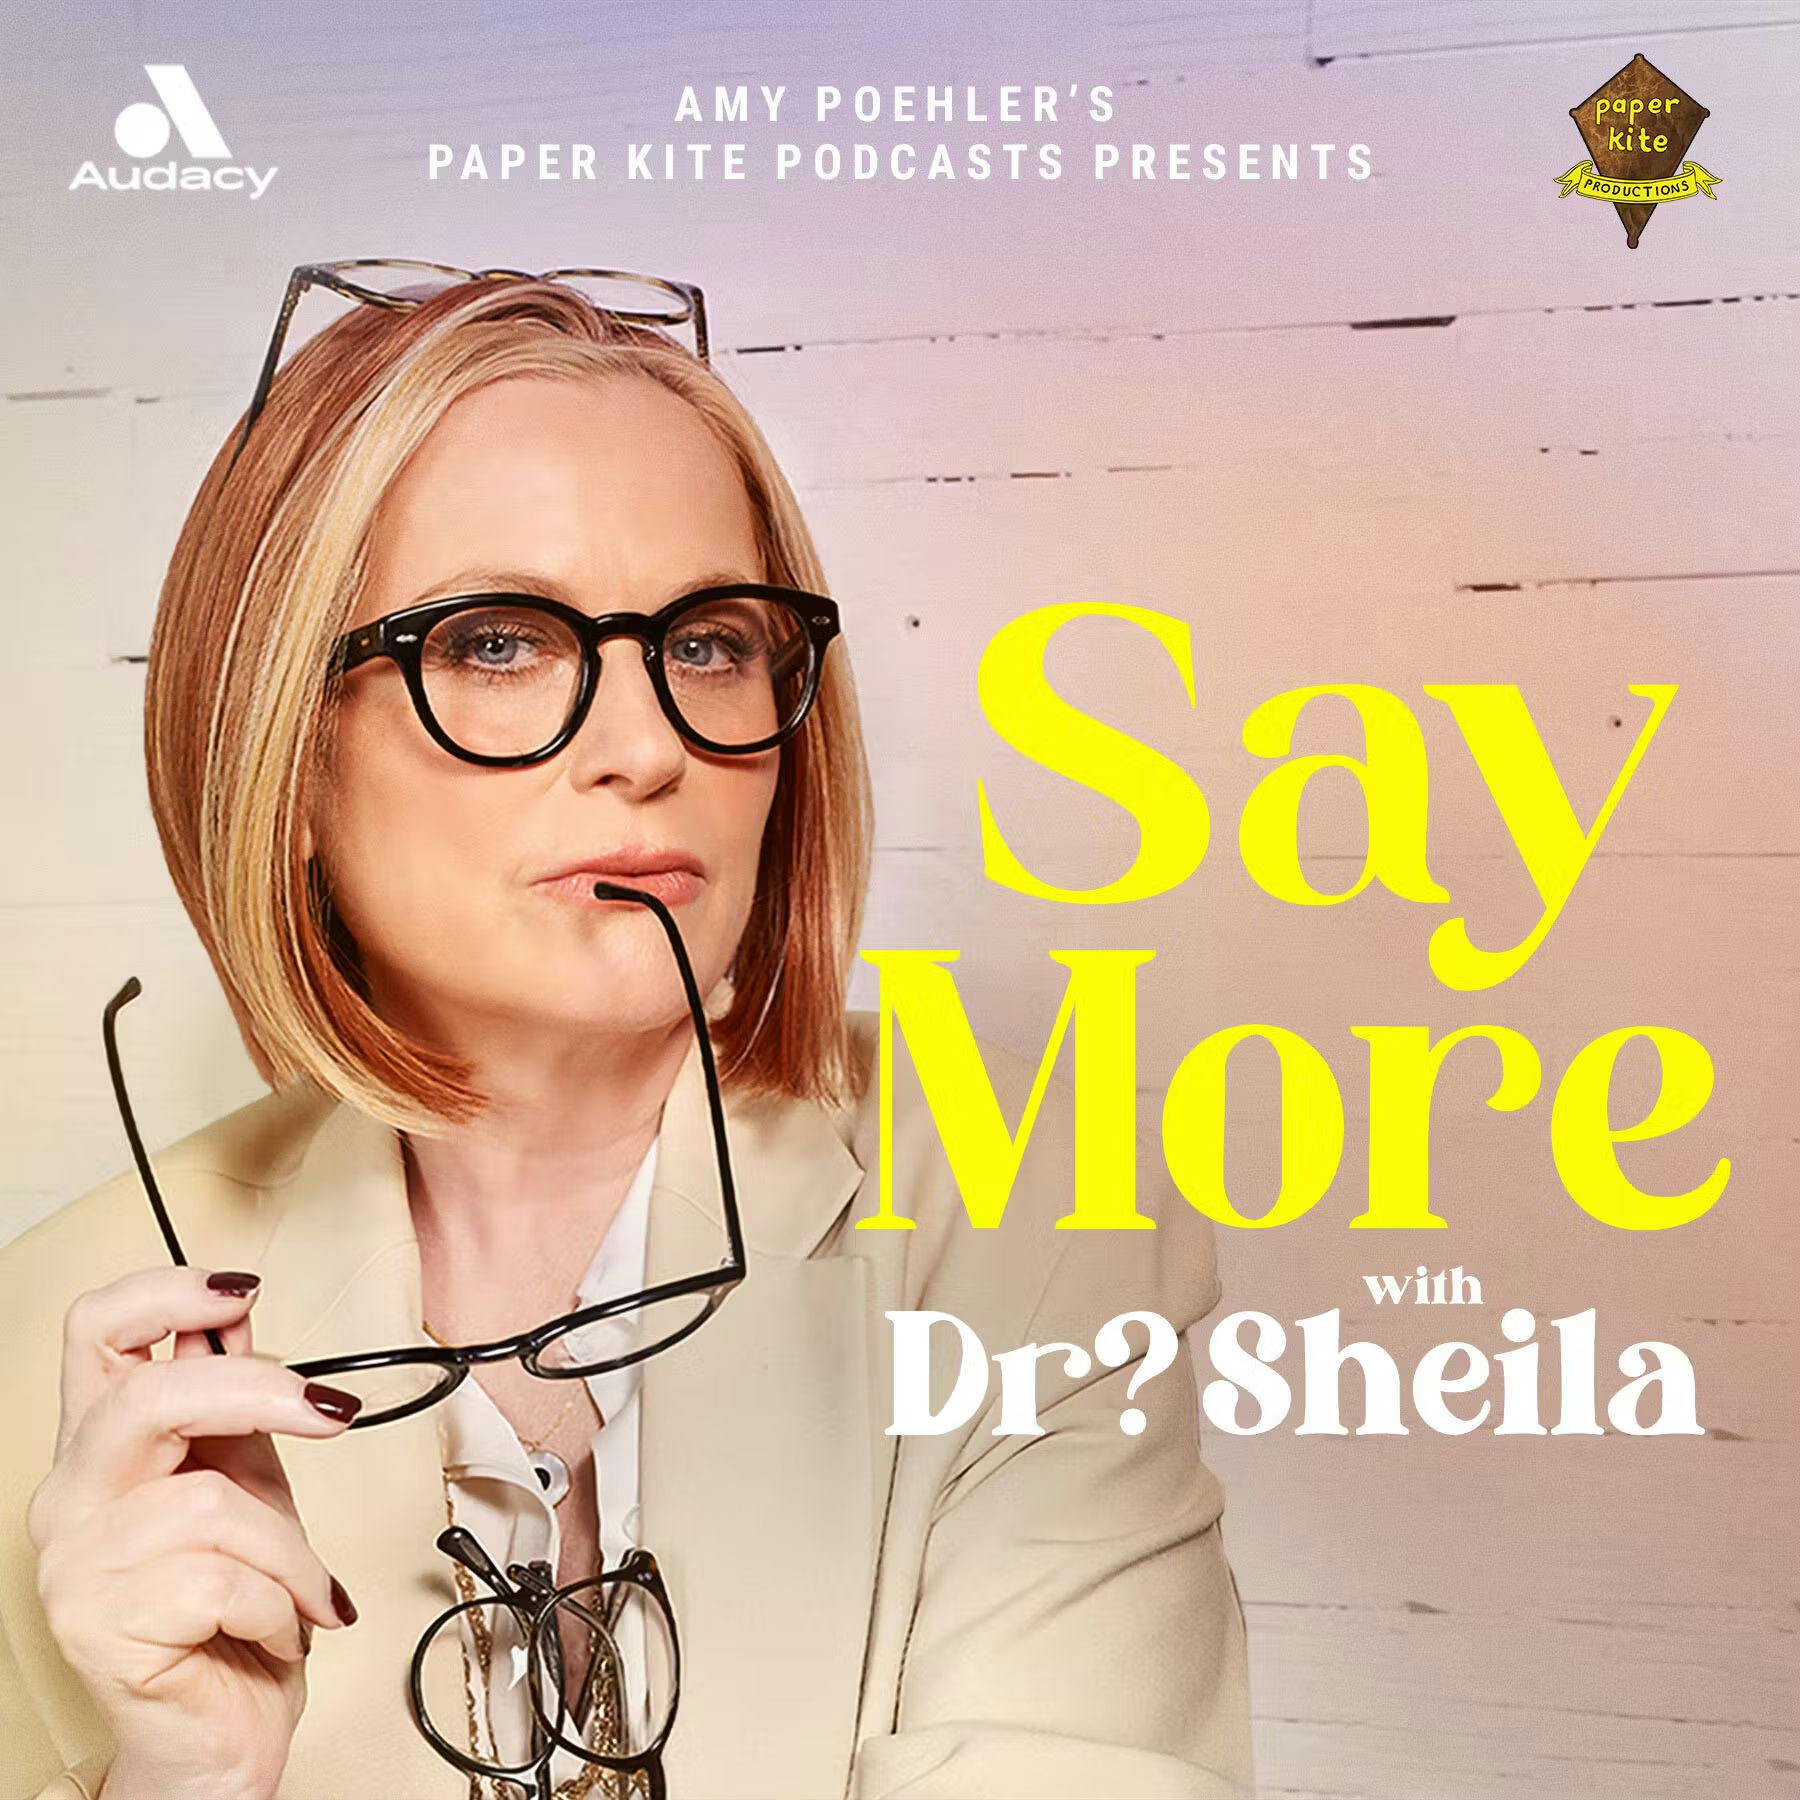 Say More with Dr? Sheila